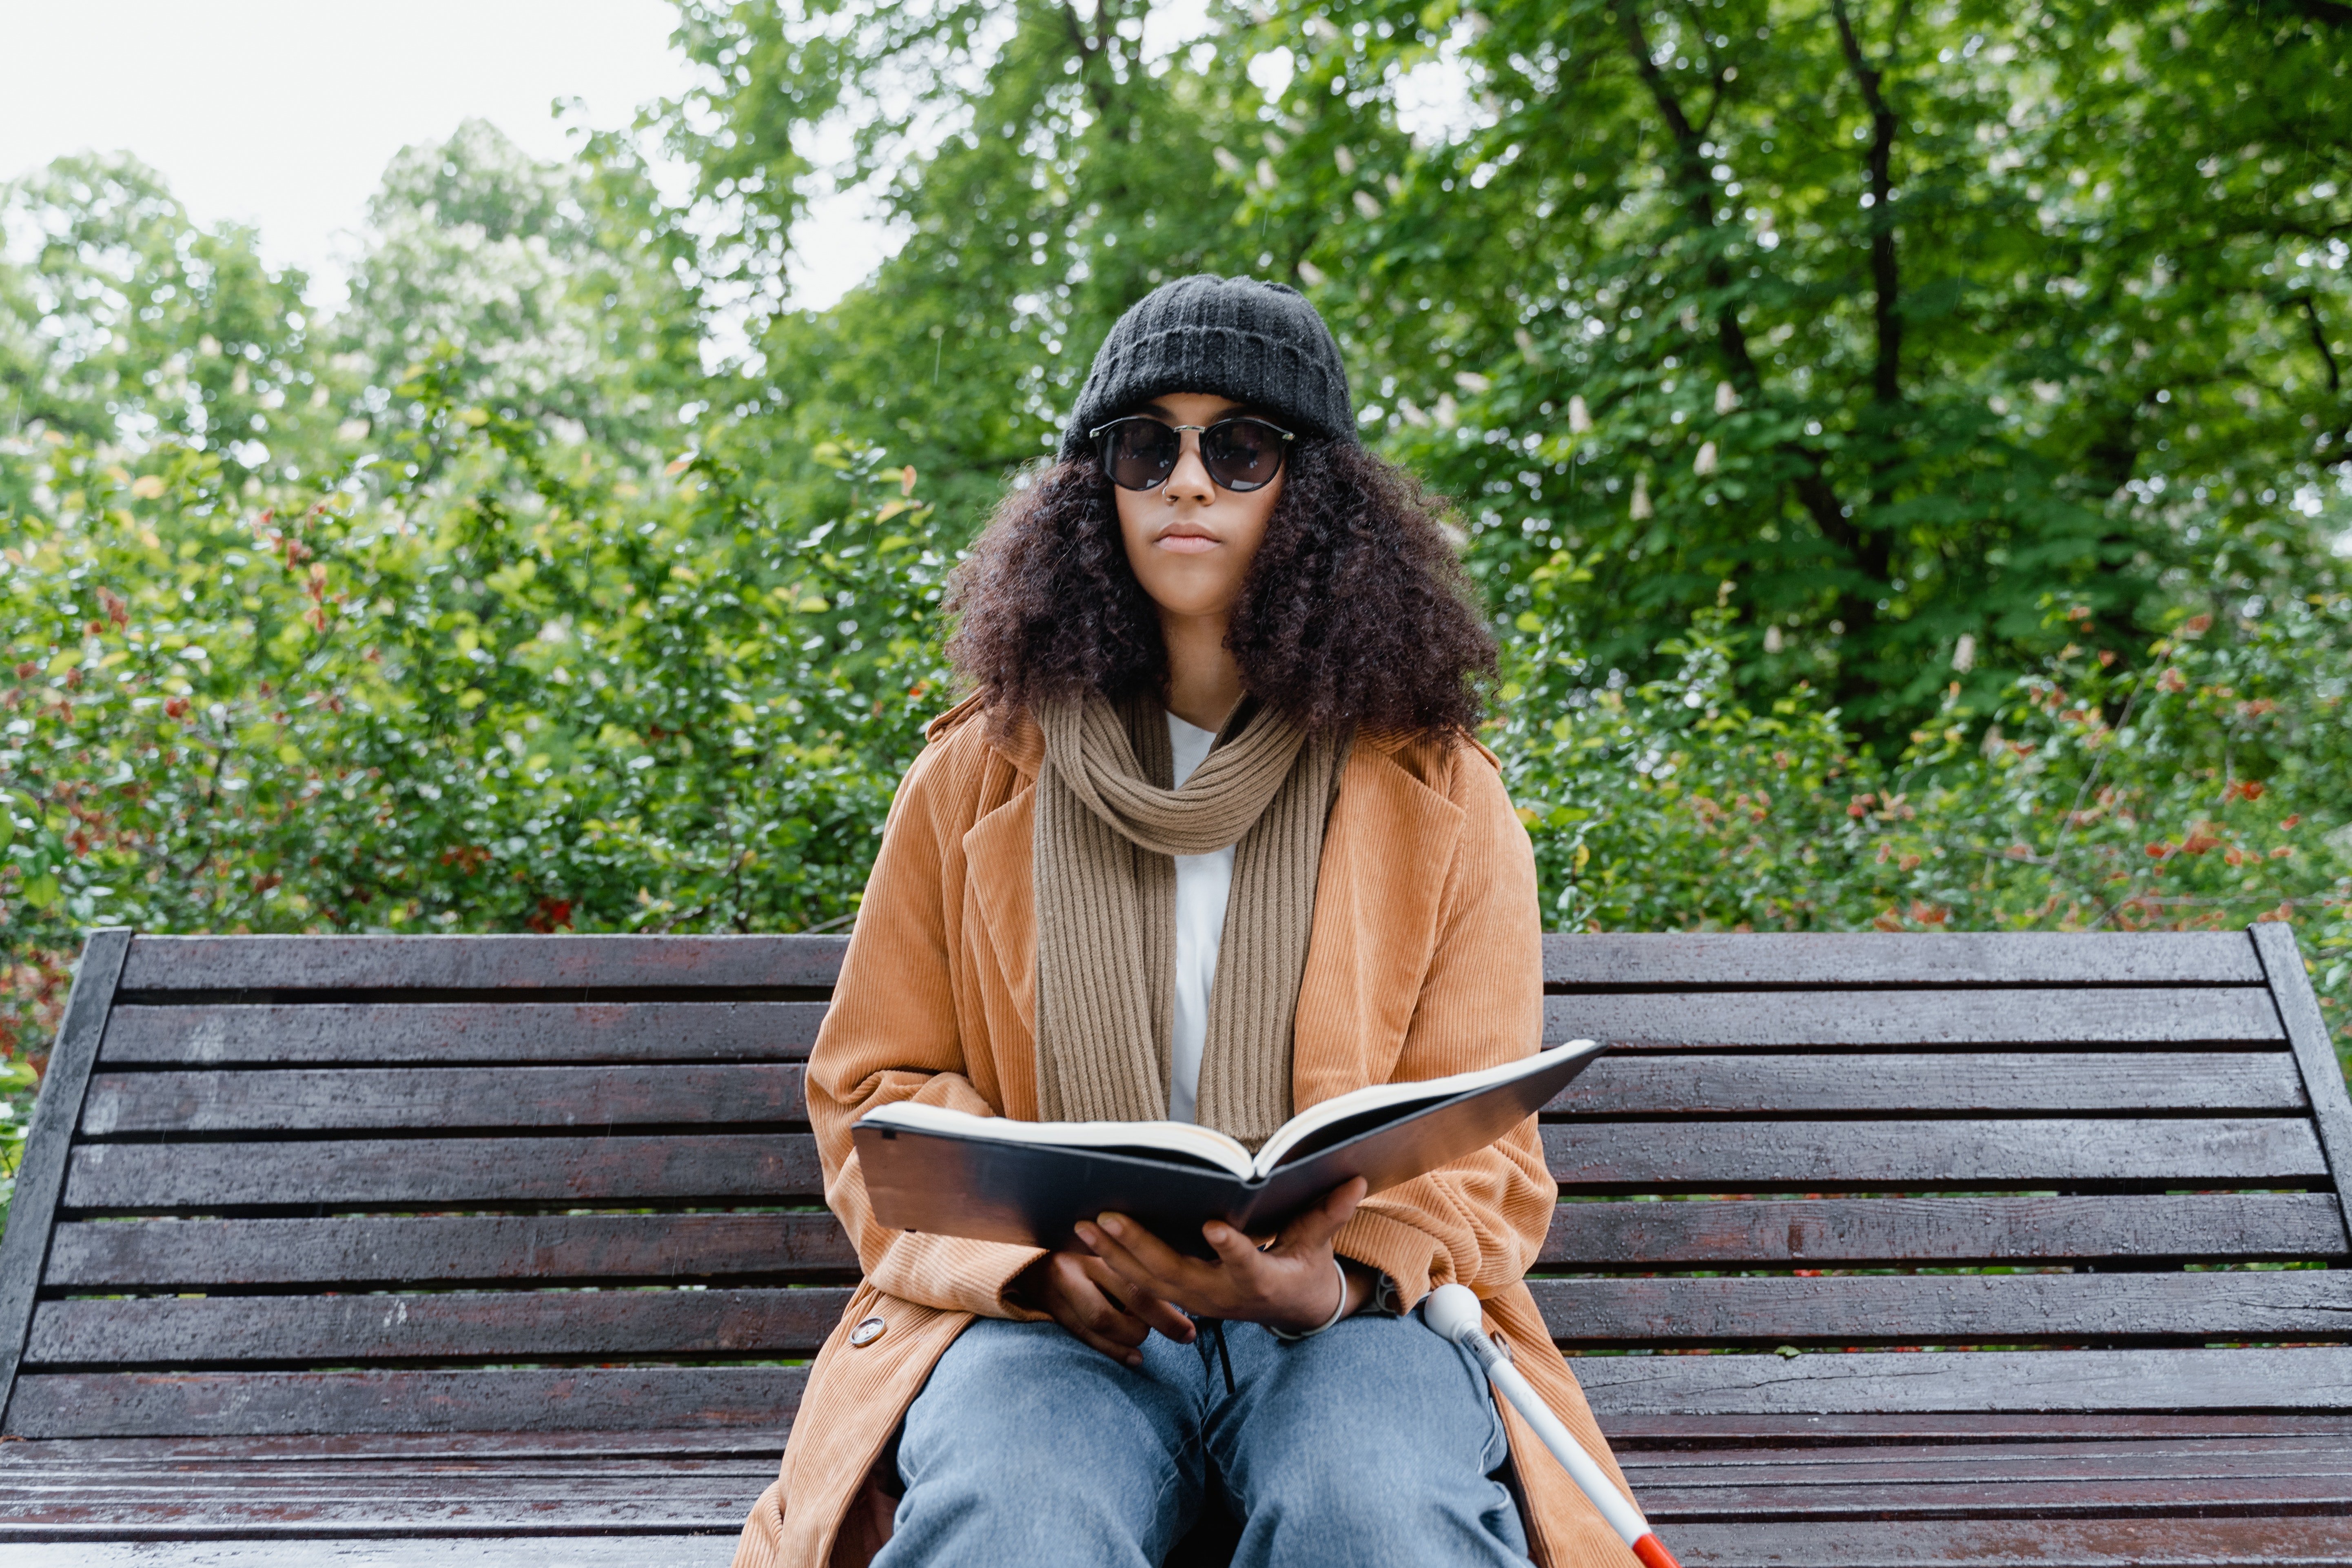 Pictured - A young woman sitting on a bench holding a book wearing sunglasses | Source: Pexels 